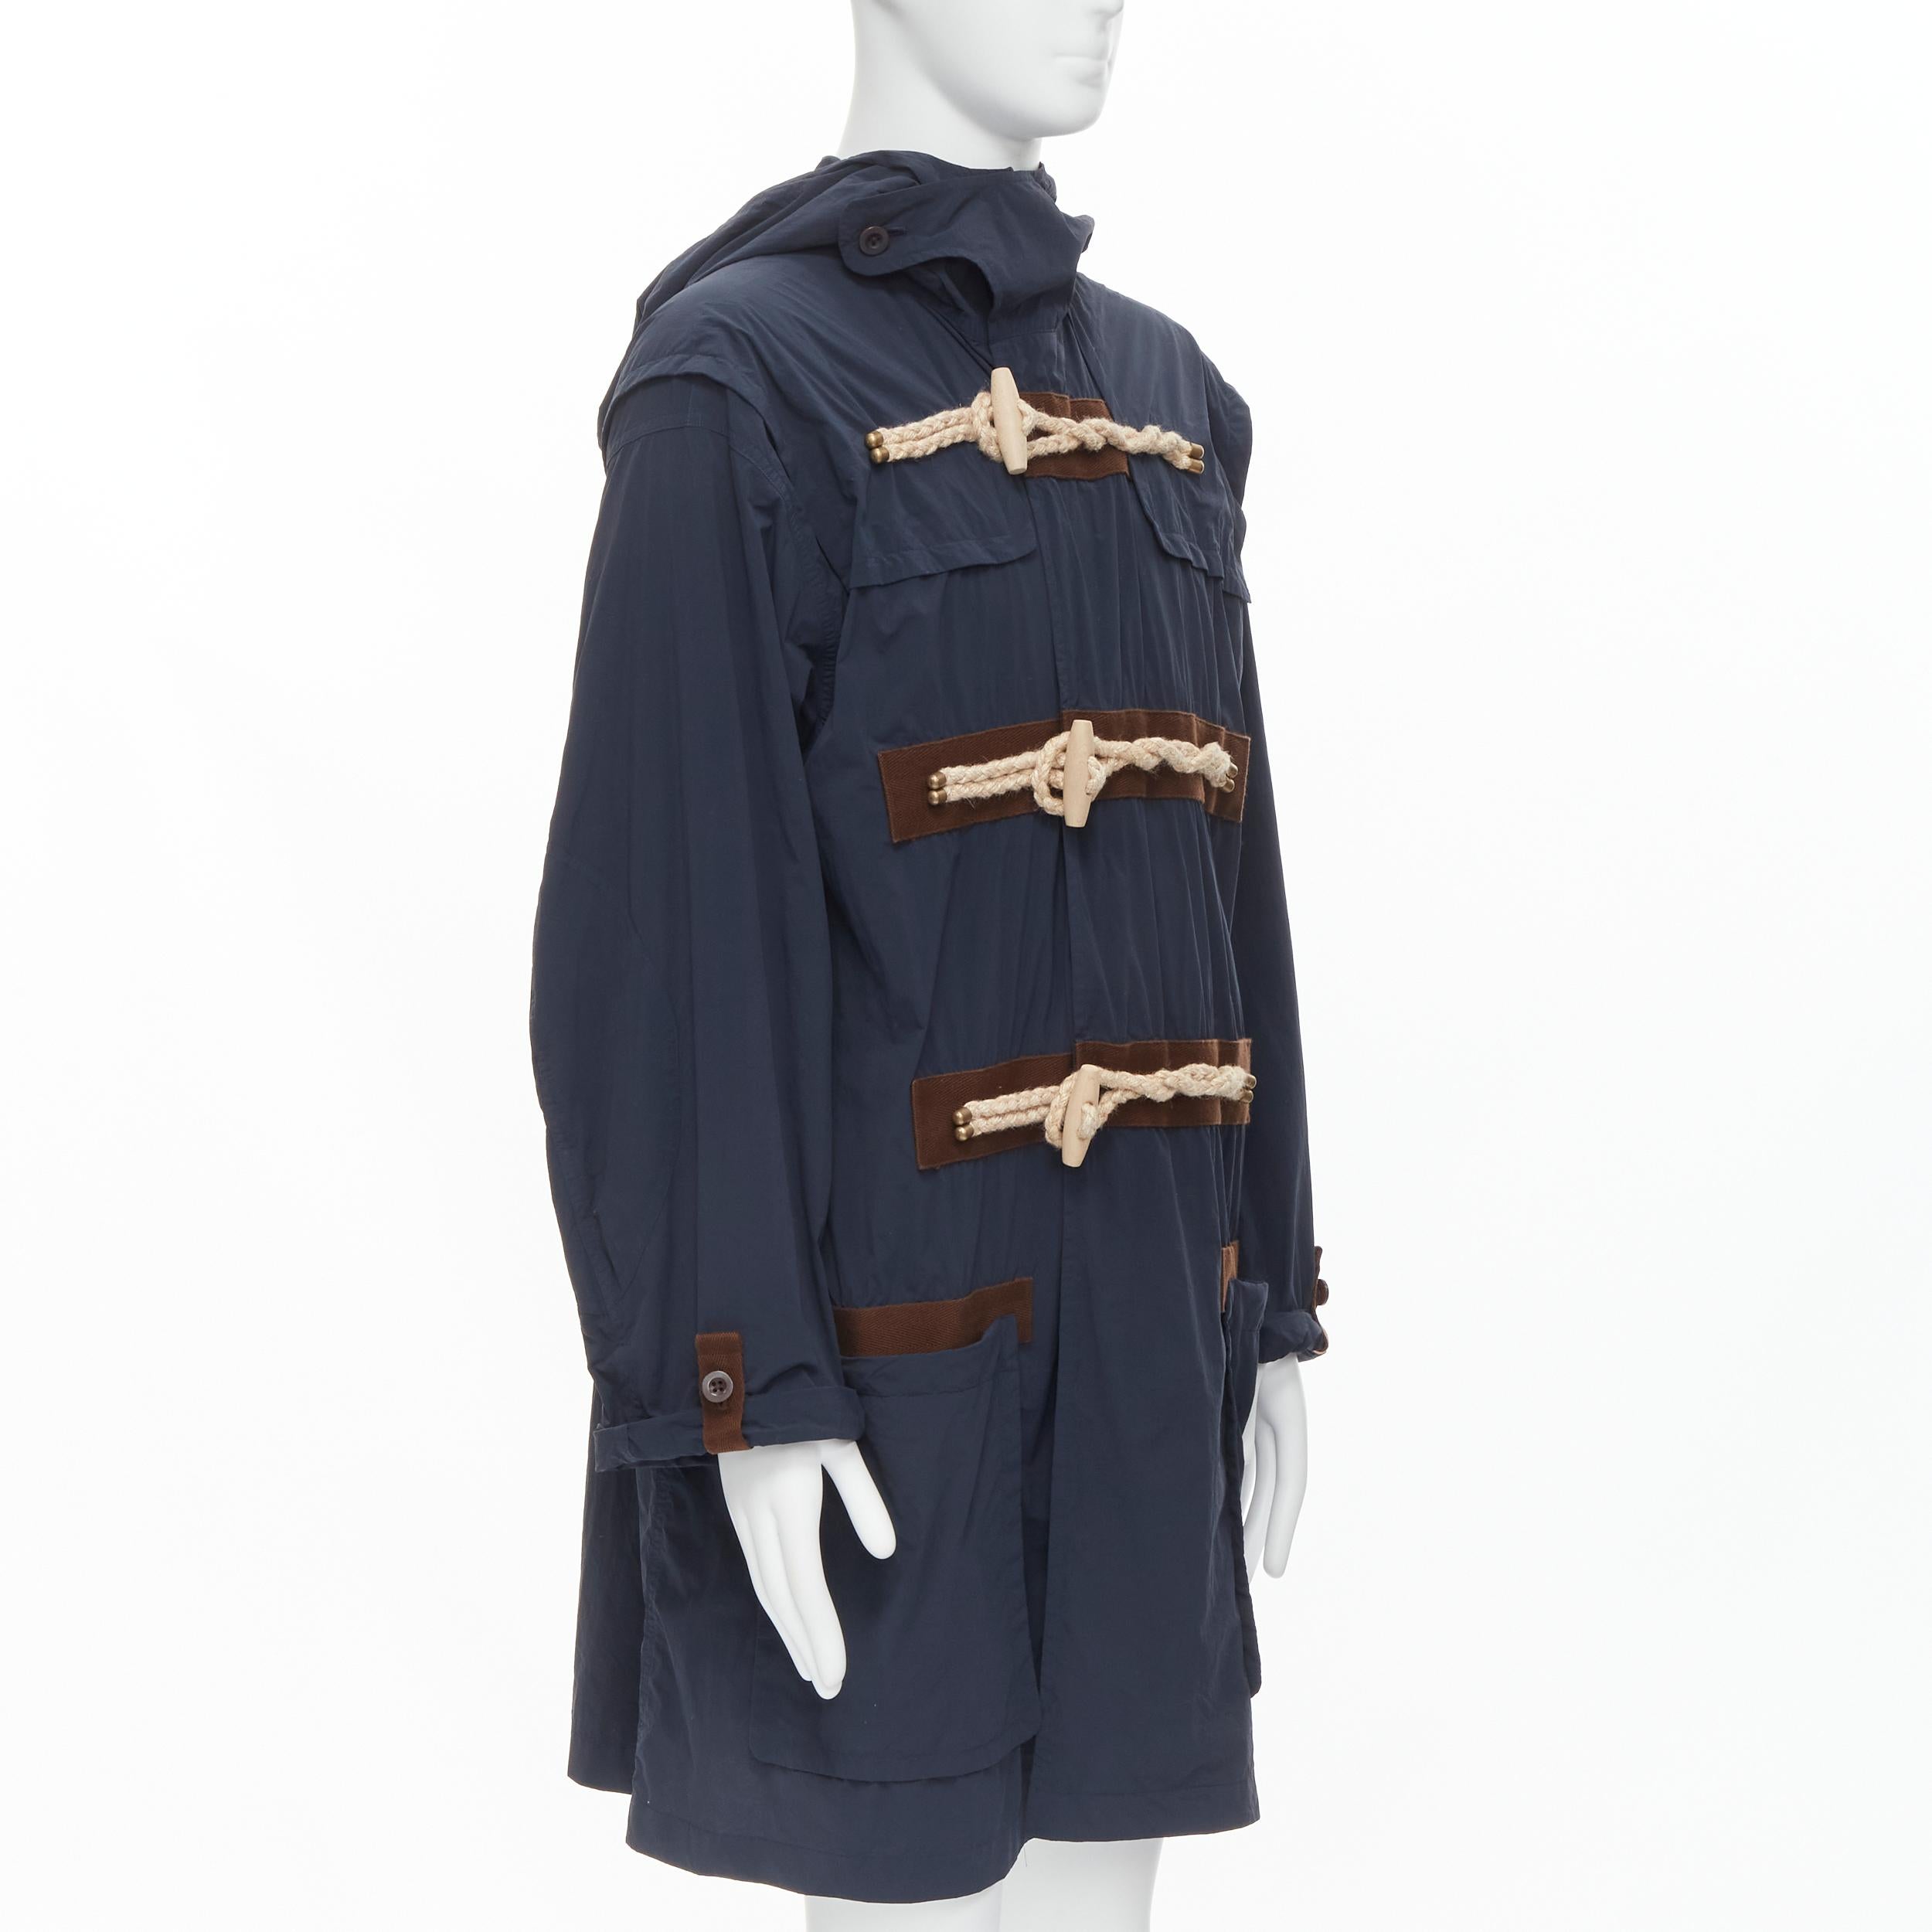 KOLOR navy blue rope wood toggle button anorak parka jacket JP2 M 
Reference: CAWG/A00214 
Brand: Kolor 
Material: Nylon 
Color: Navy 
Pattern: Solid 
Closure: Toggle 
Extra Detail: Rope and wood toggle button. Hooded parka. Double patch pockets at